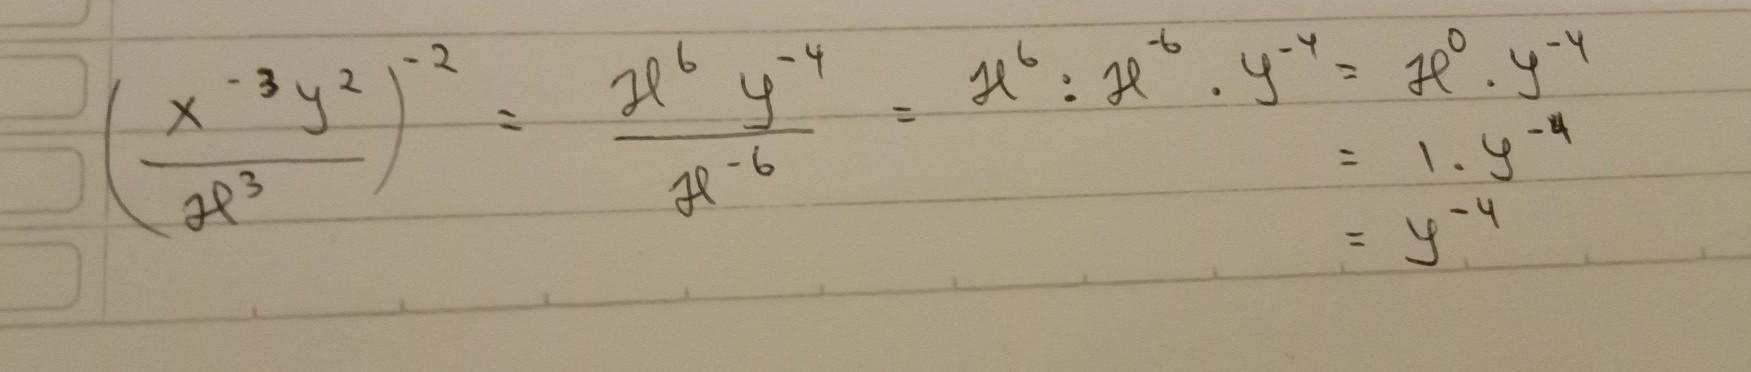 (X^-3y^2/x^3)^-2Simplify The Expression. Your Final Answer Should Use Positive Exponents.